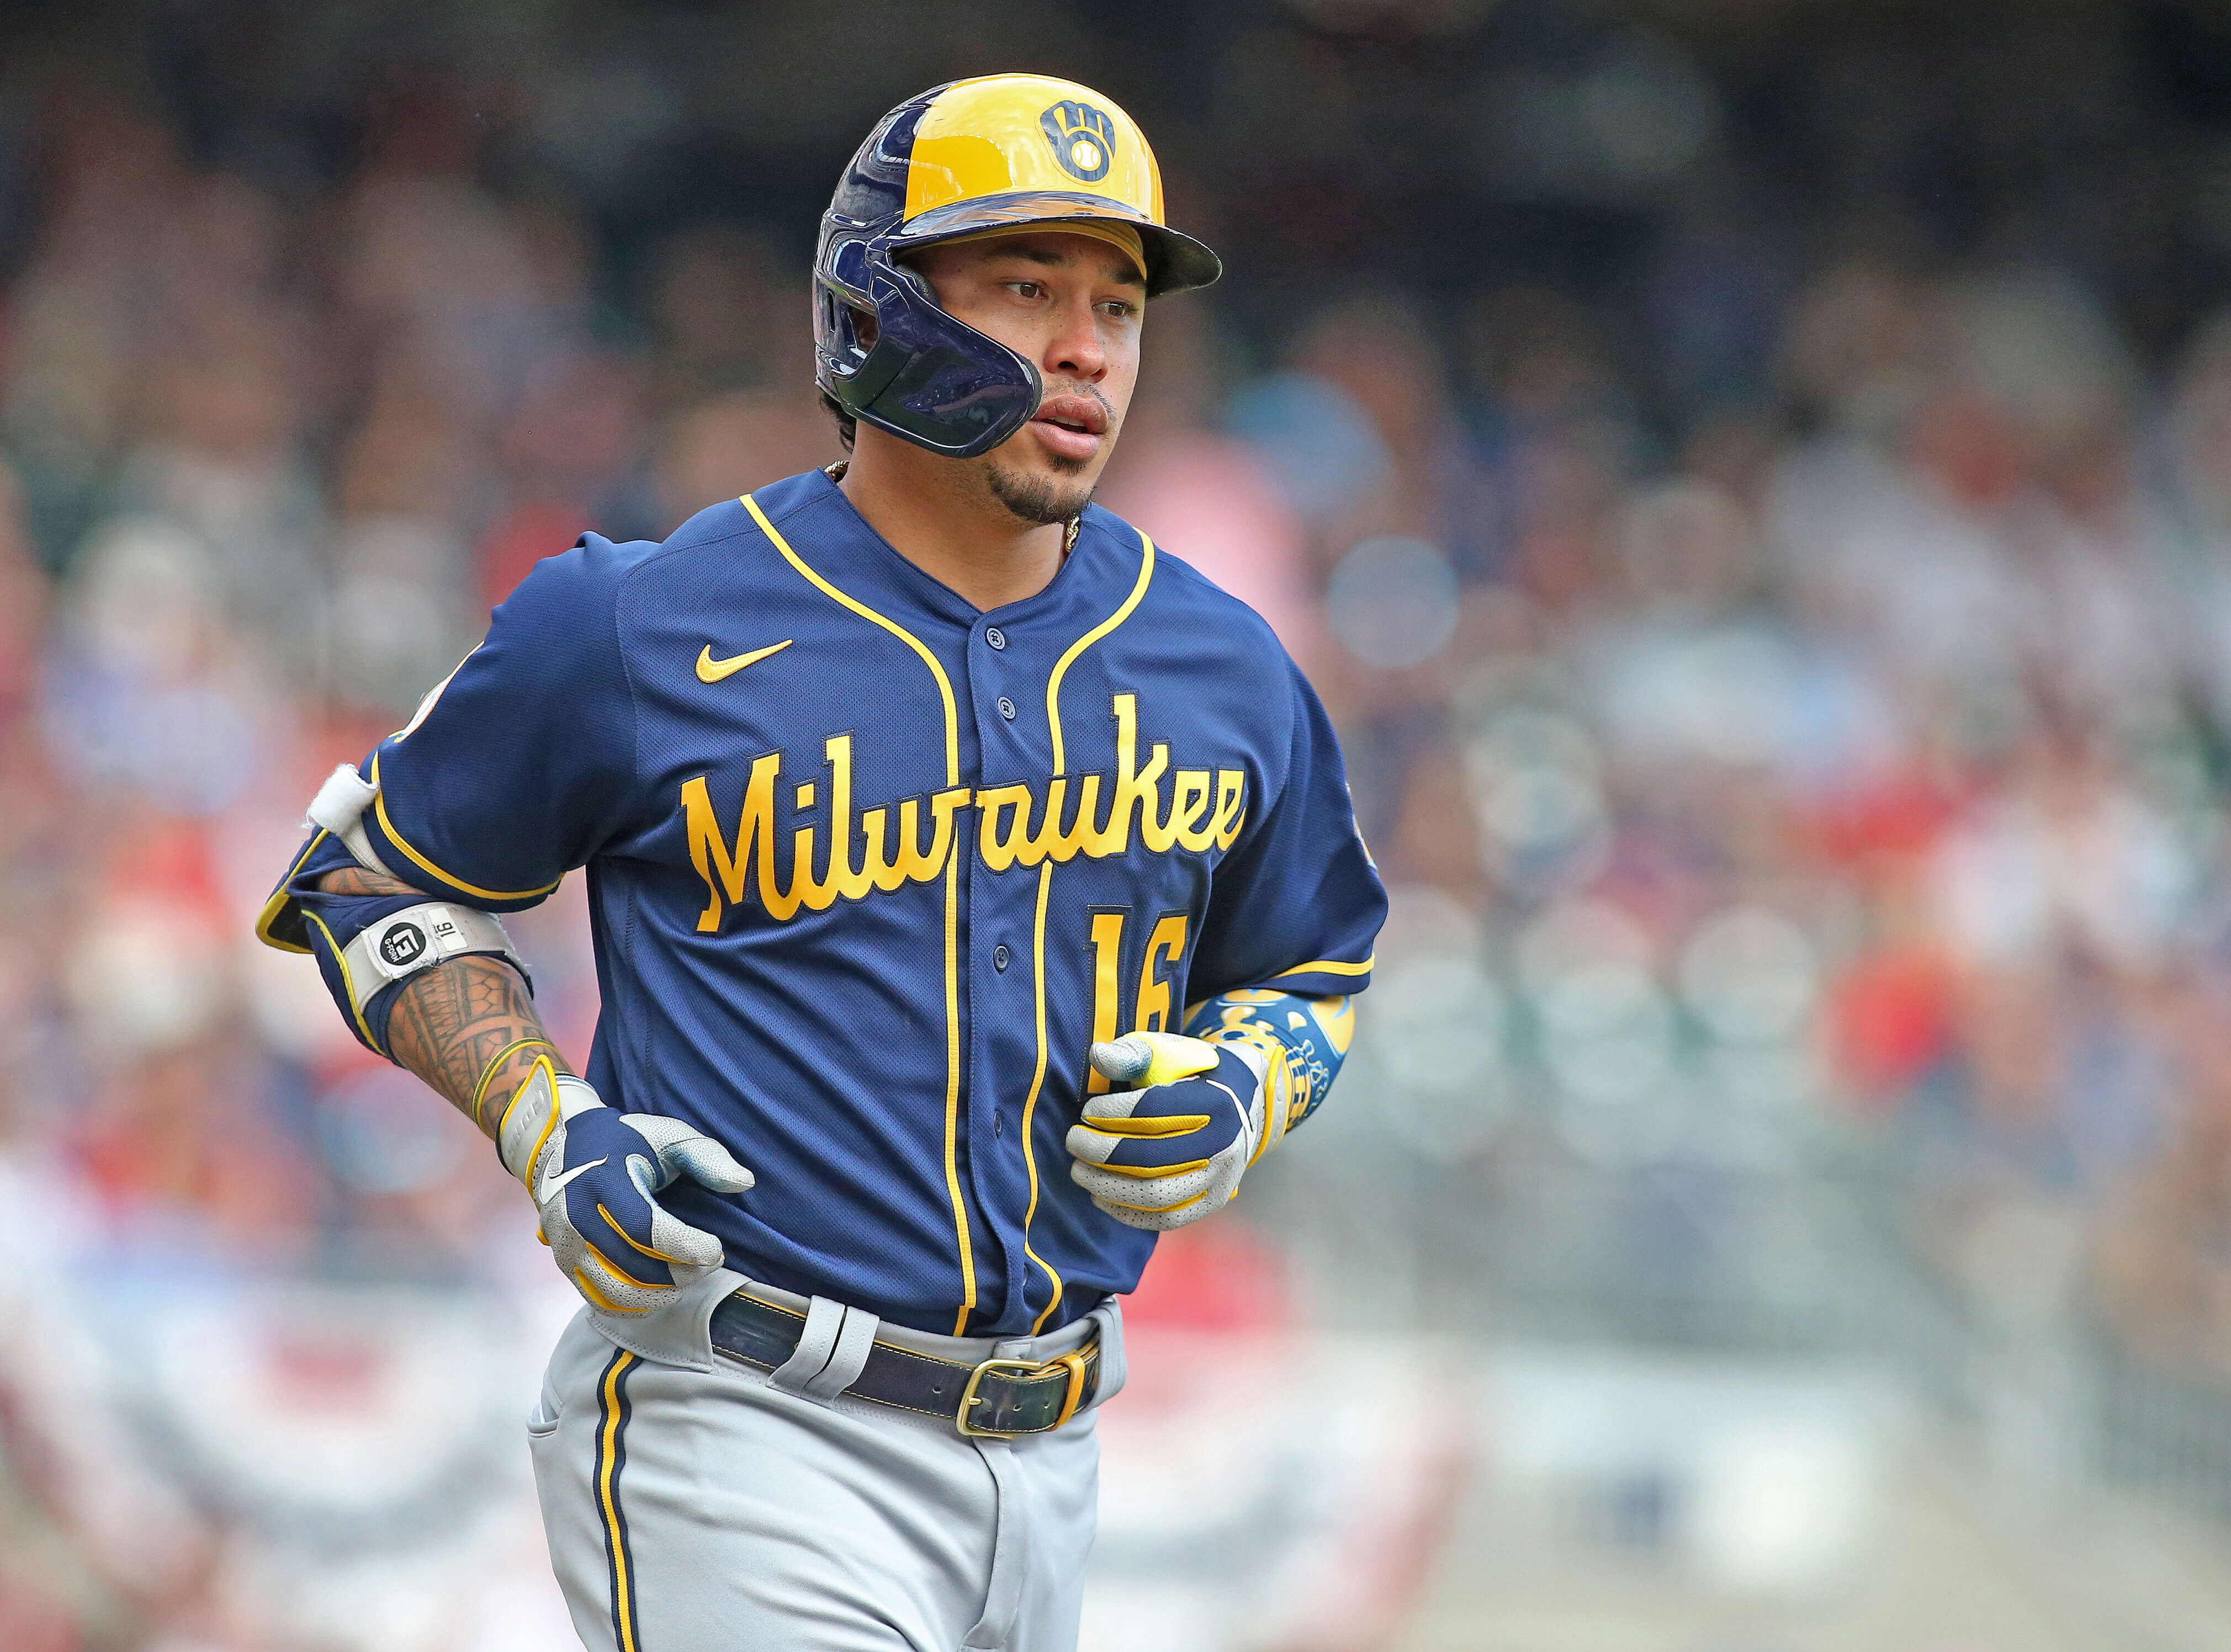 Chicago Cubs vs Milwaukee Brewers lineup predictions - April 8, 2022